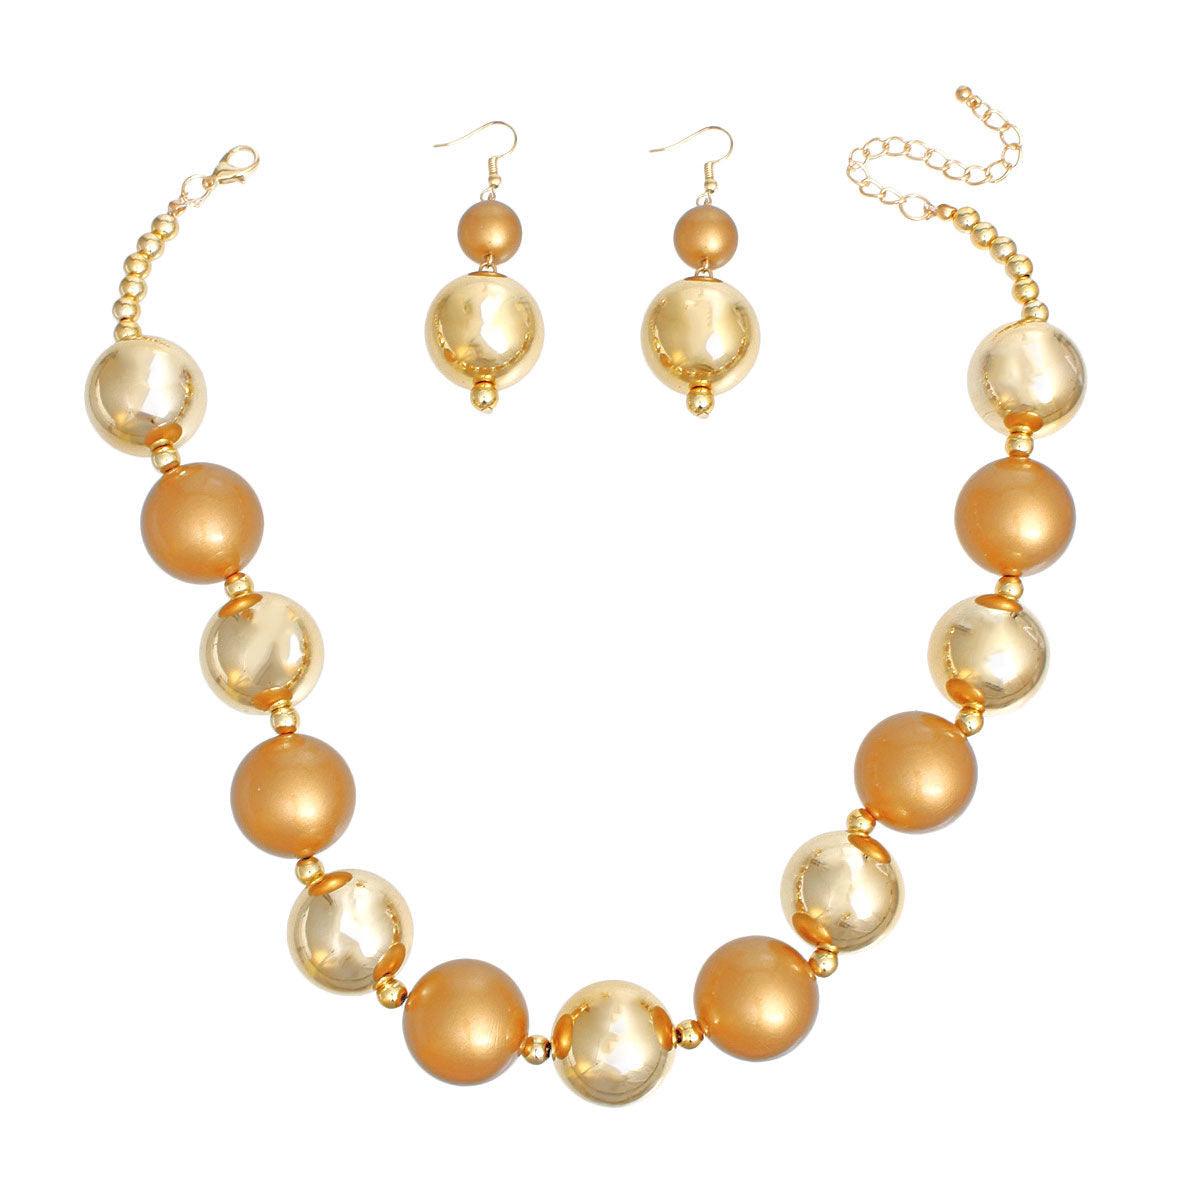 Pearl Necklace Bronze Gold Jumbo Set for Women